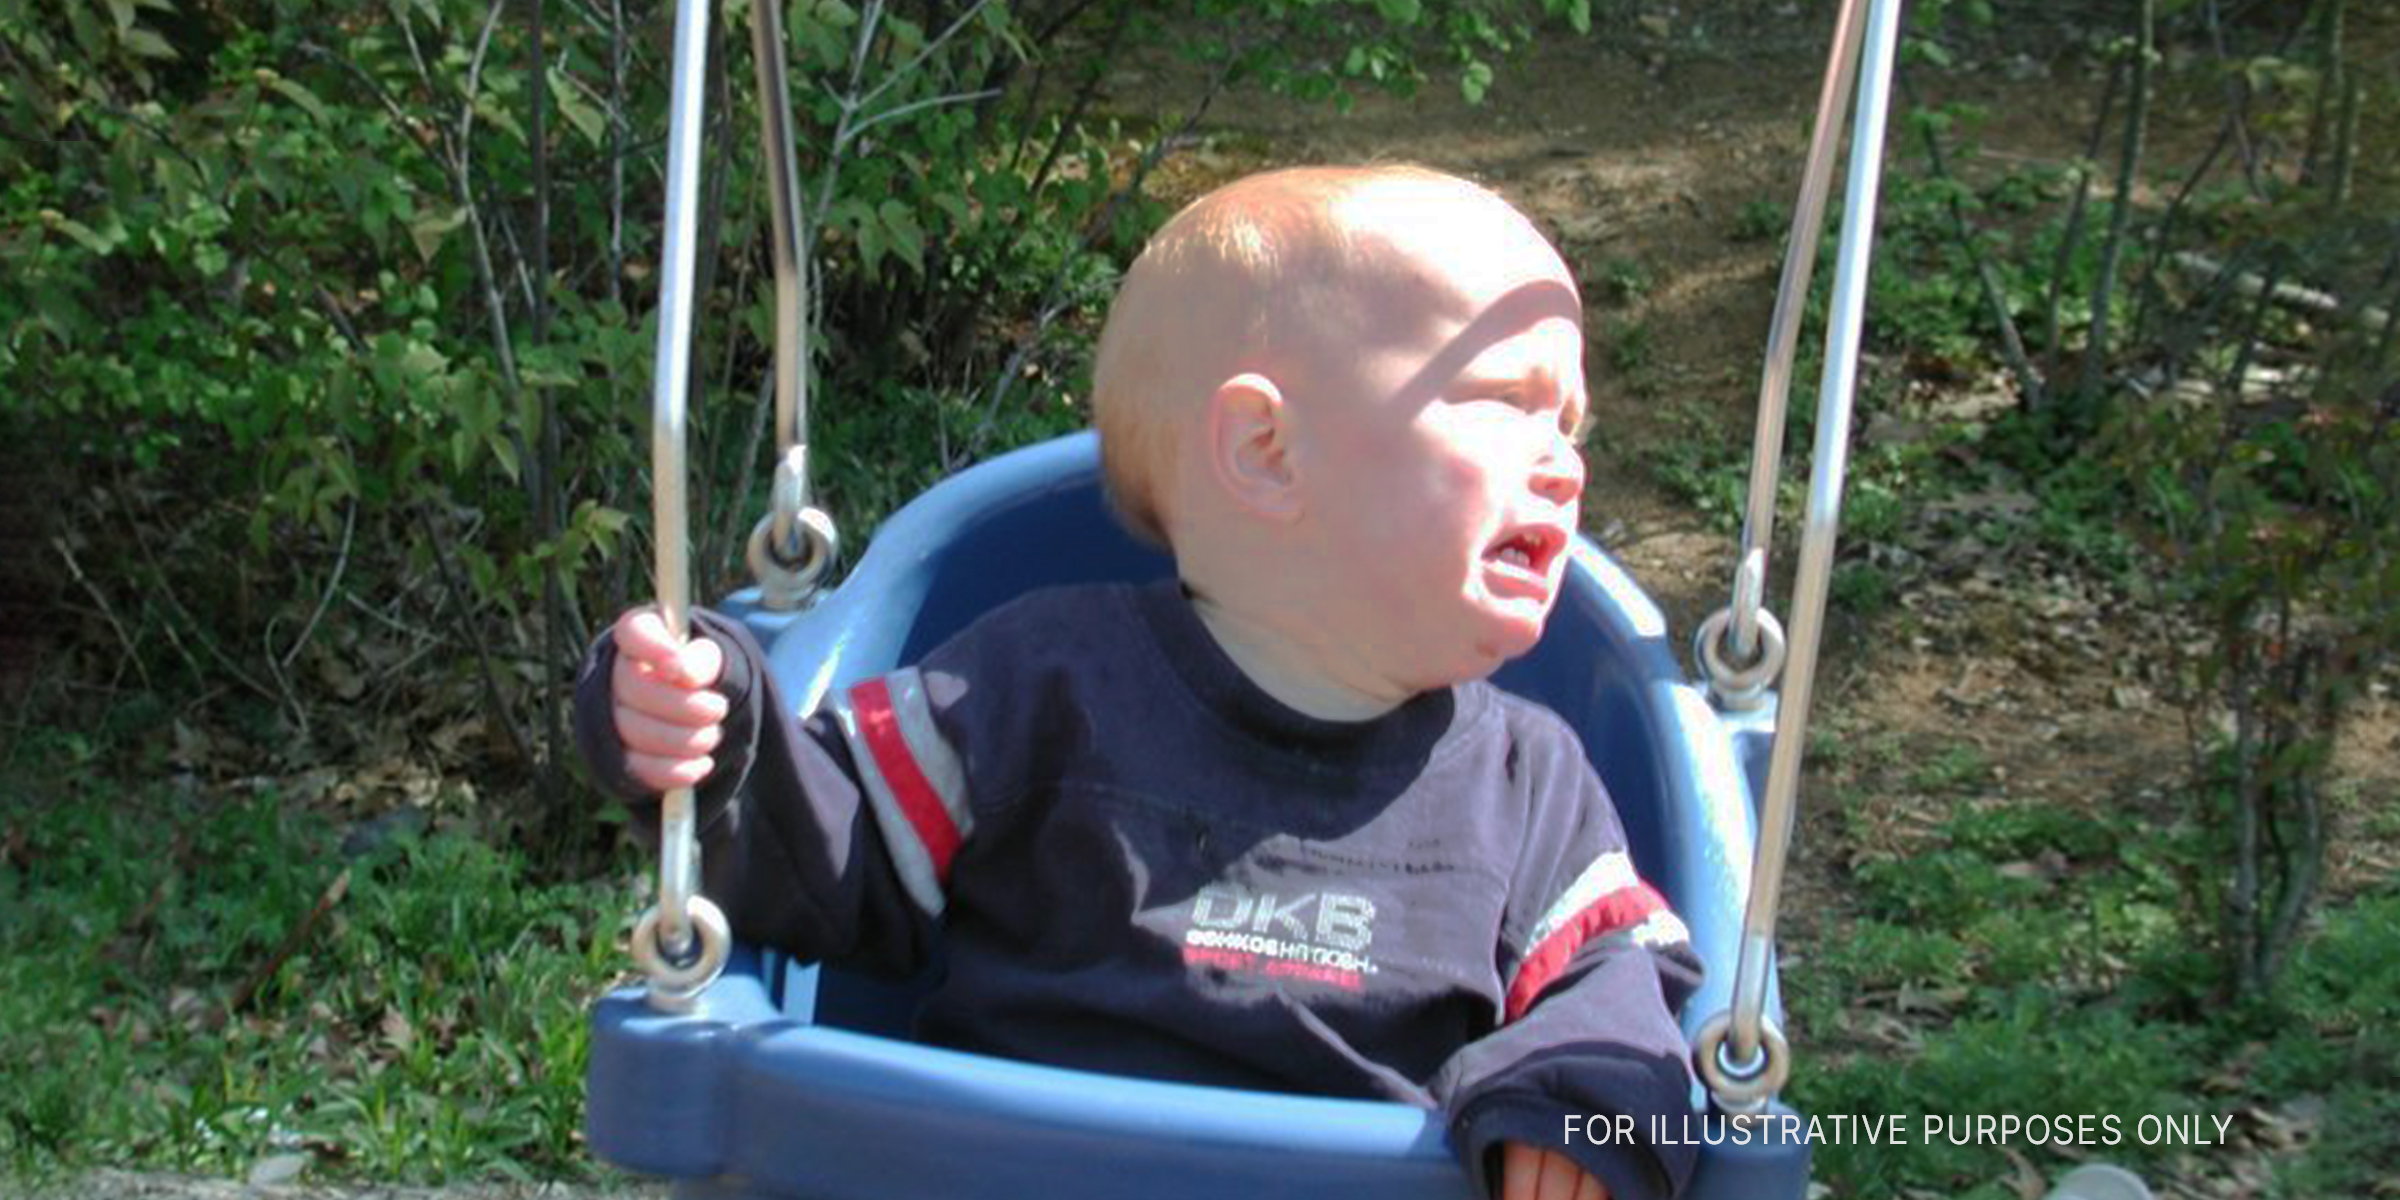 A baby crying on the swing | Source: Flickr/subewl (CC BY-SA 2.0)